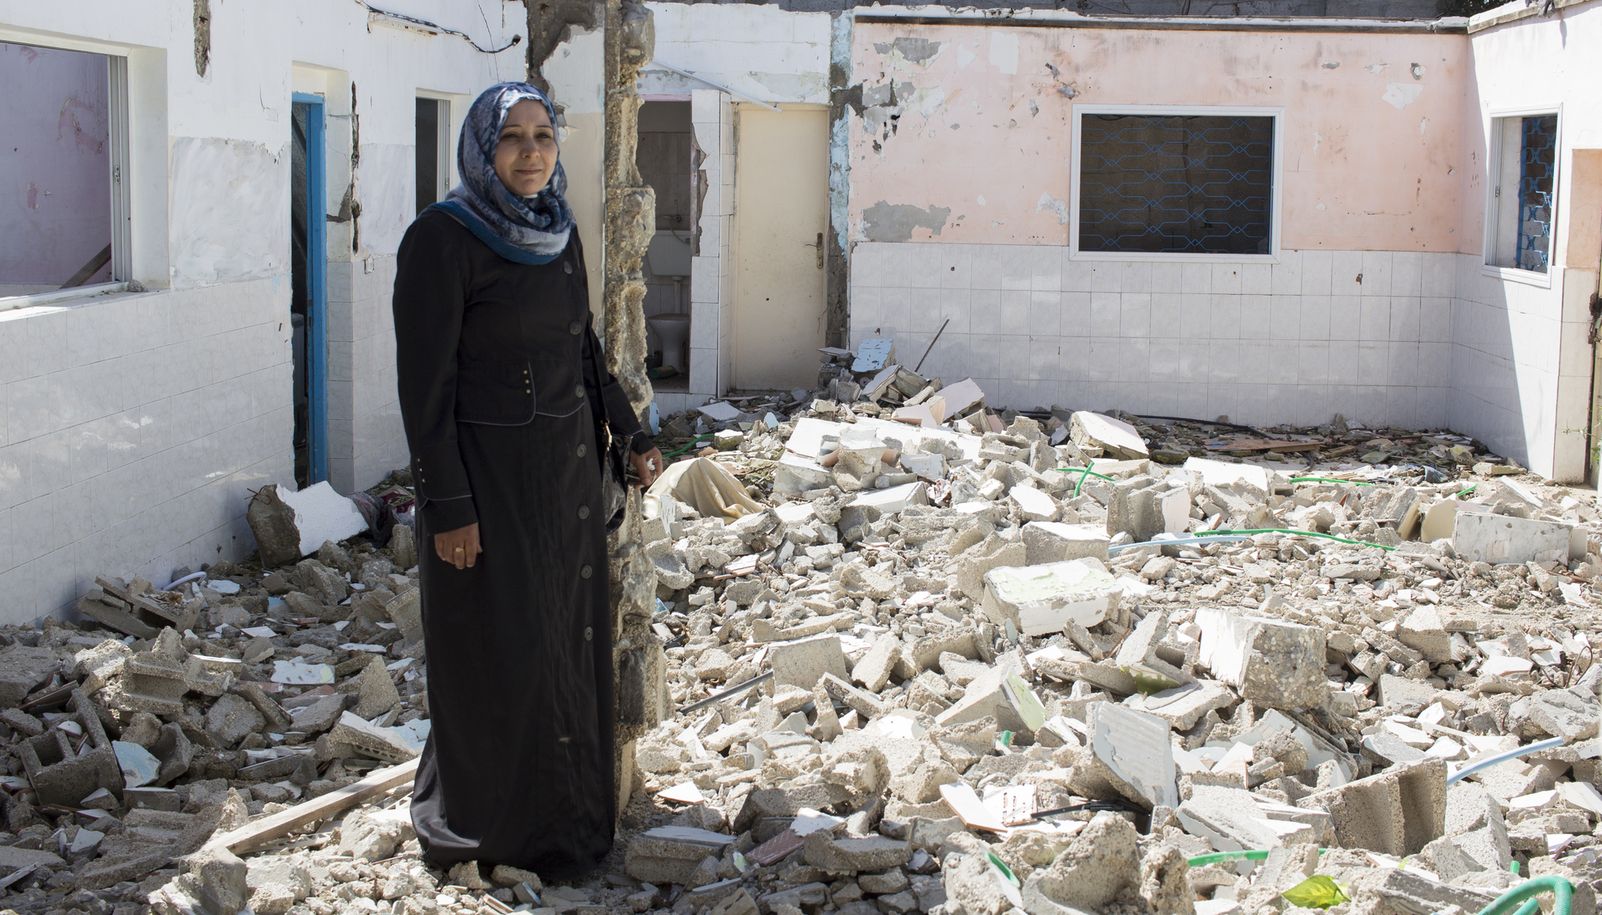 February 2015: Gaza Strip immediately after the end of the conflict called 